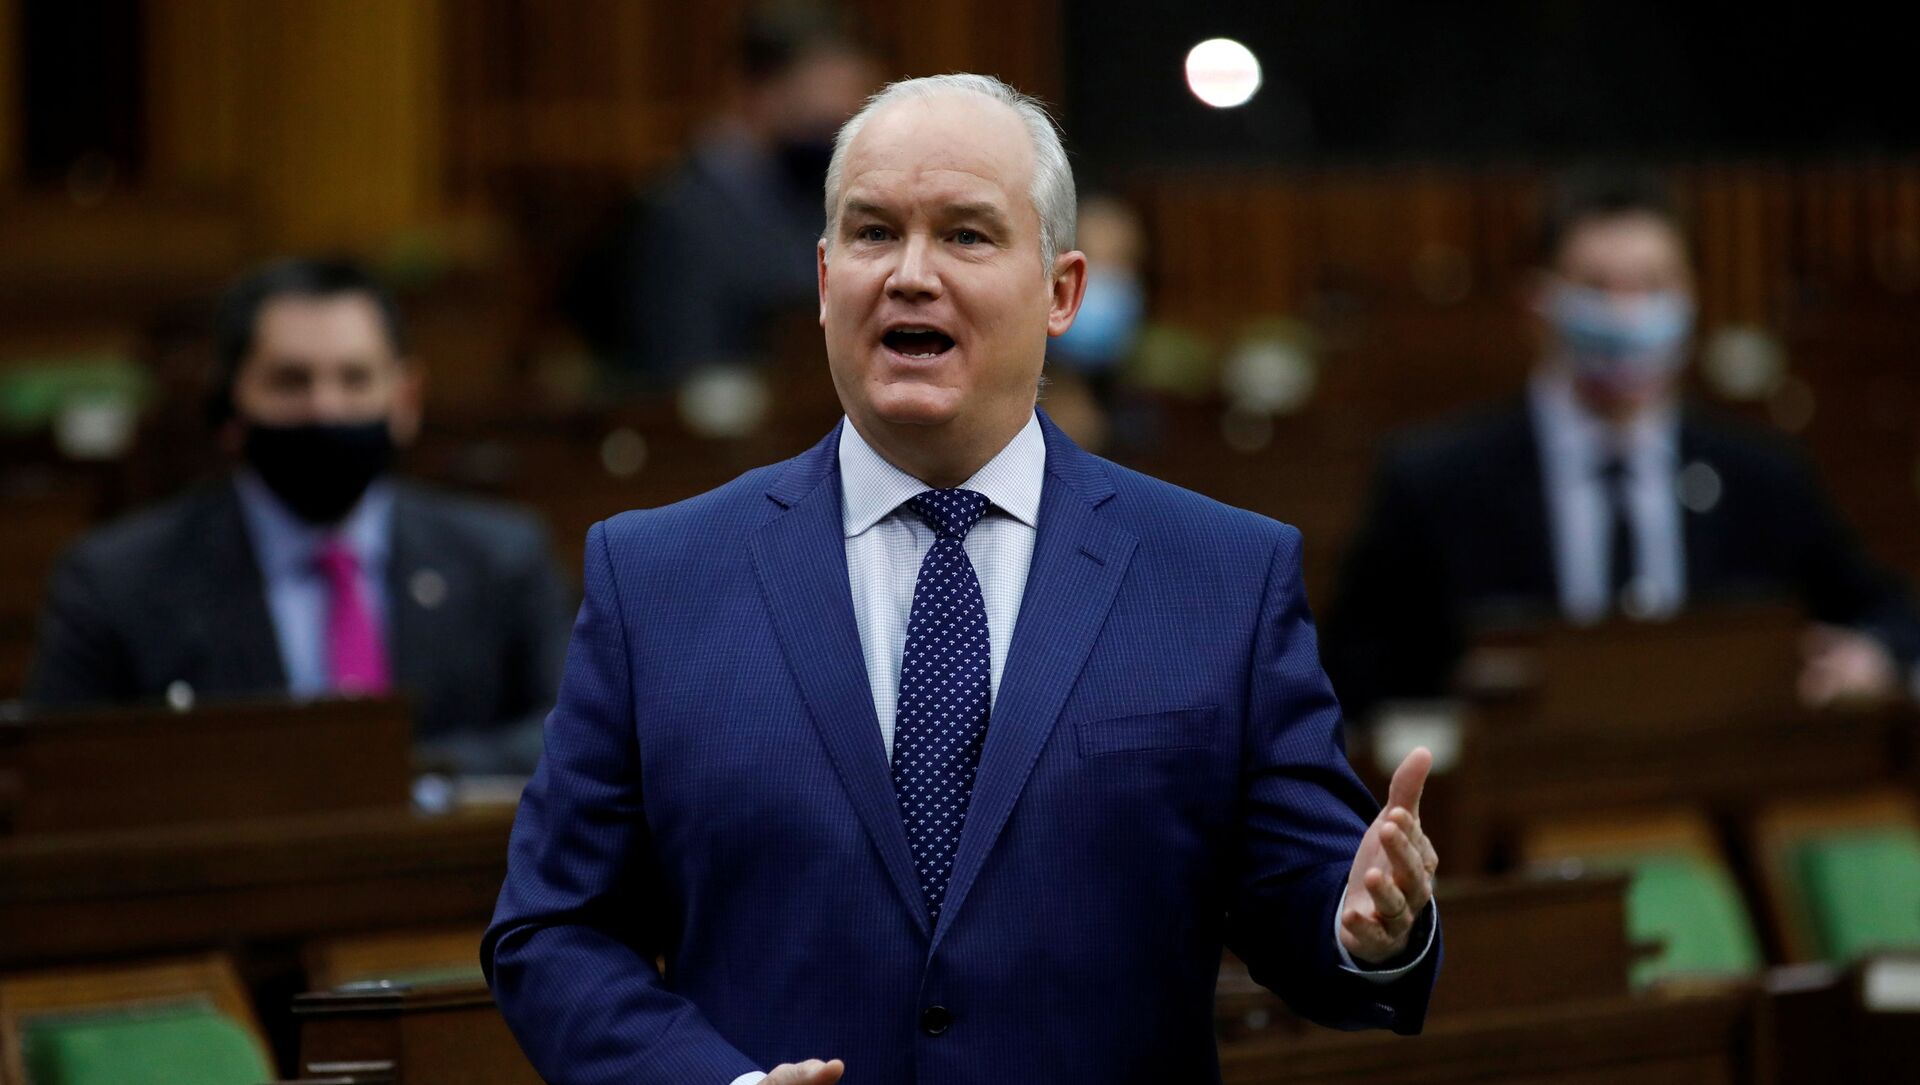 Canada's Conservative Party leader Erin O'Toole speaks during Question Period in the House of Commons on Parliament Hill in Ottawa, Ontario, Canada, 3 February 2021. - Sputnik International, 1920, 23.02.2021